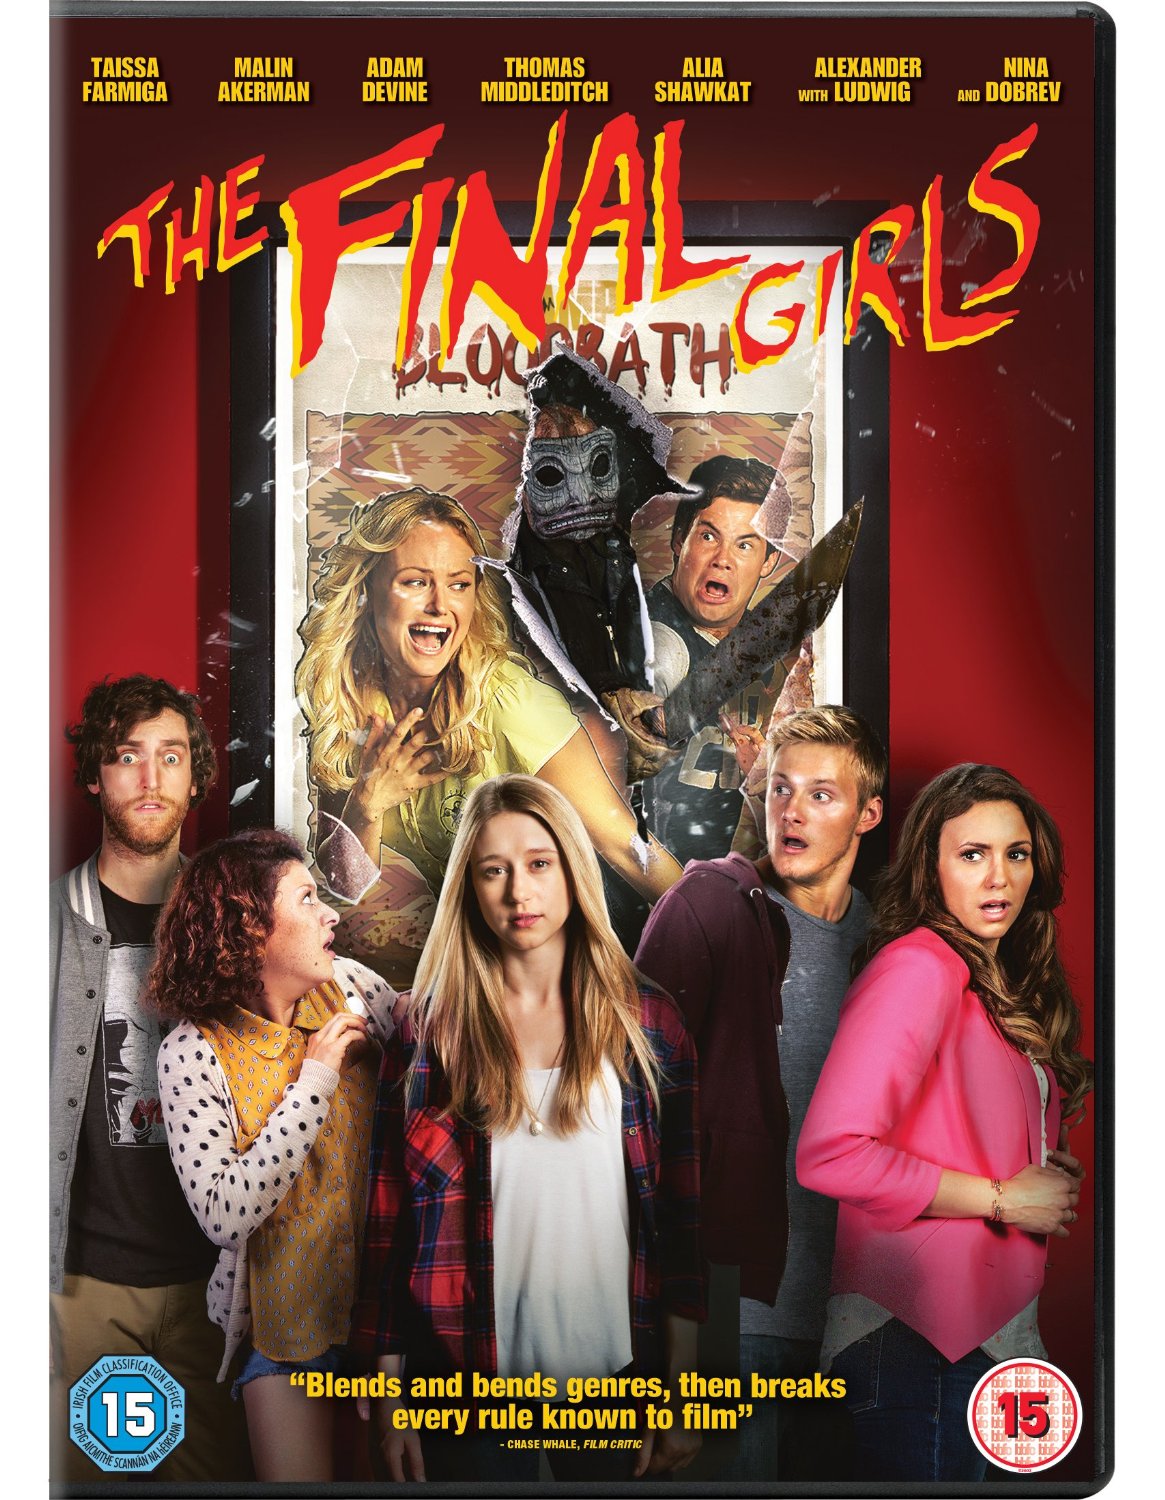 The Final Girls DVD review: ace meta horror comedy